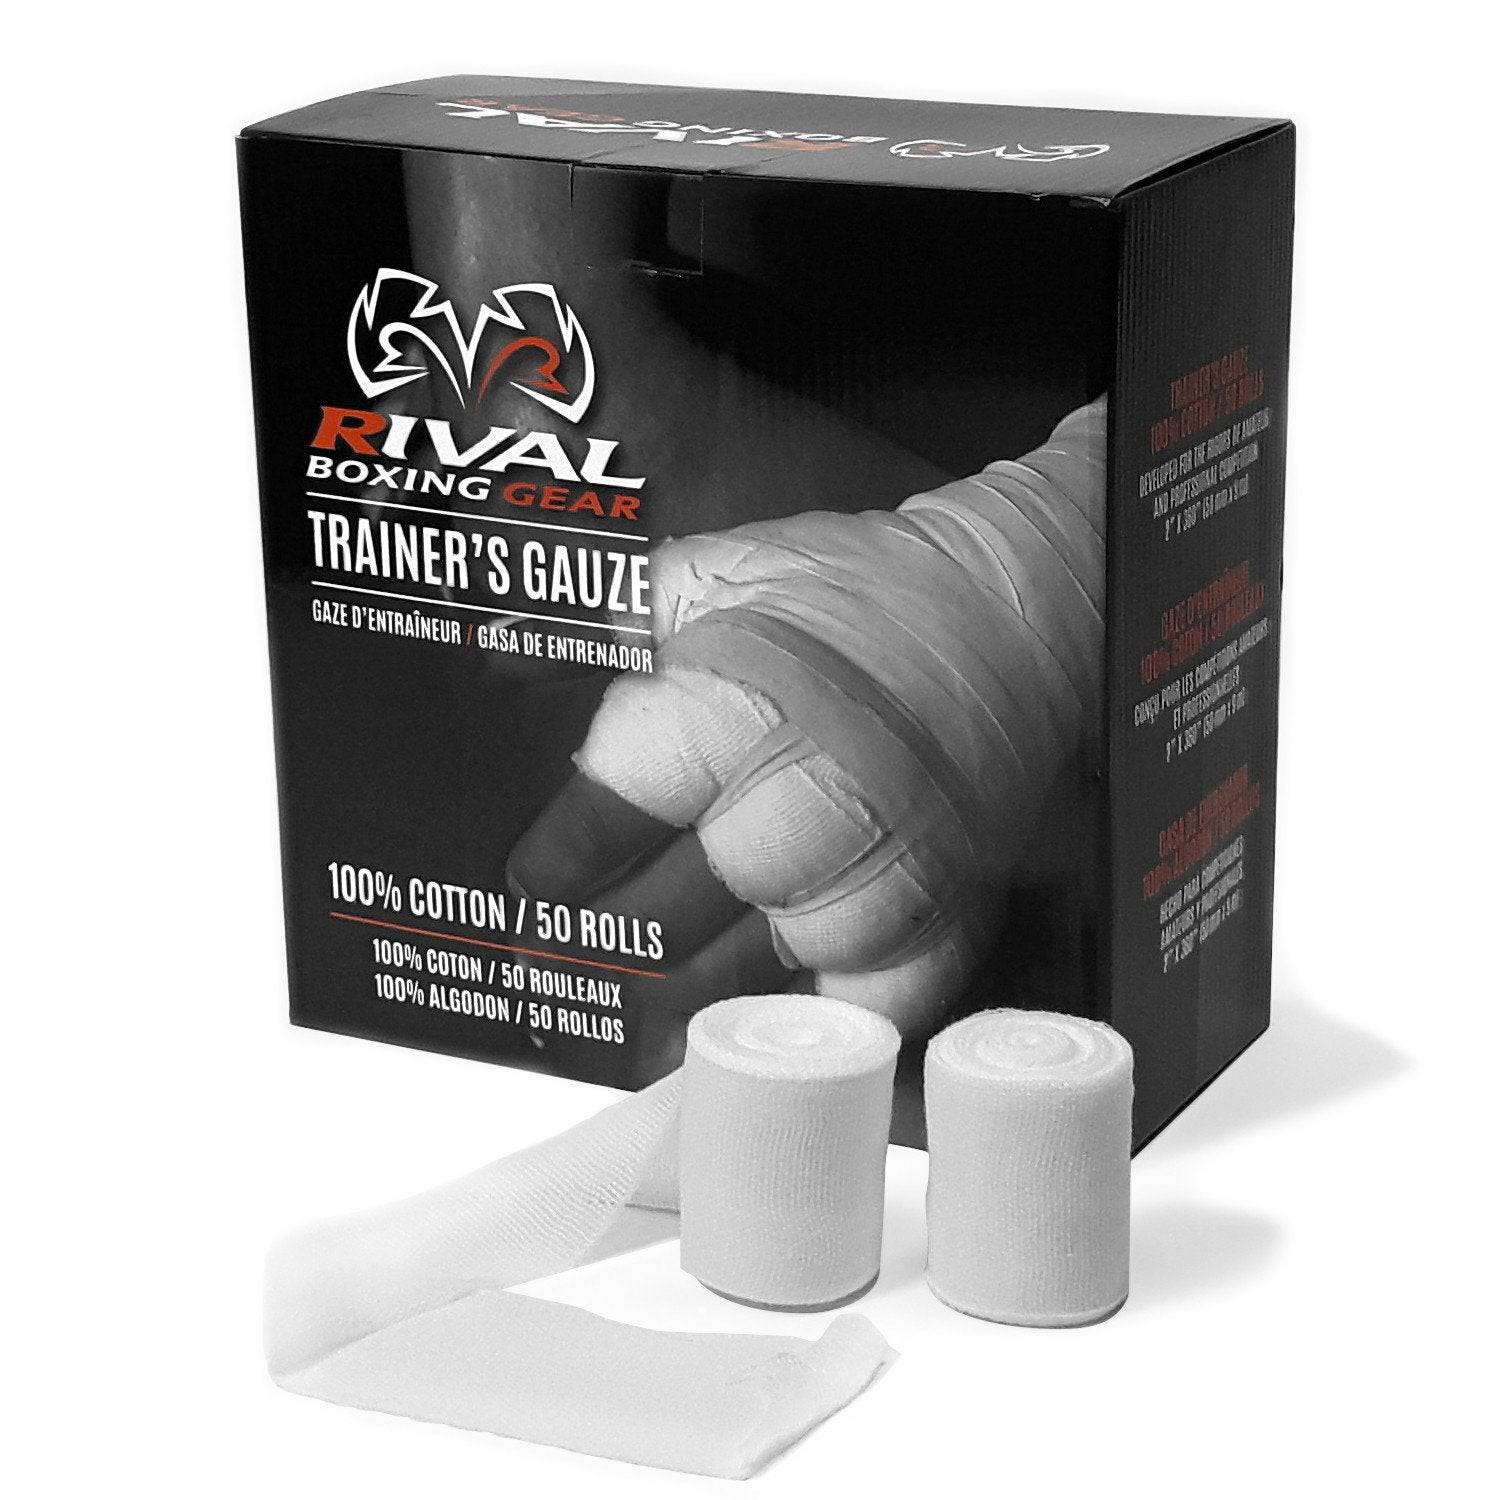 Rival | Gauze - Box of 50 rolls - XTC Fitness - Exercise Equipment Superstore - Canada - Boxing & MMA Hand Wraps